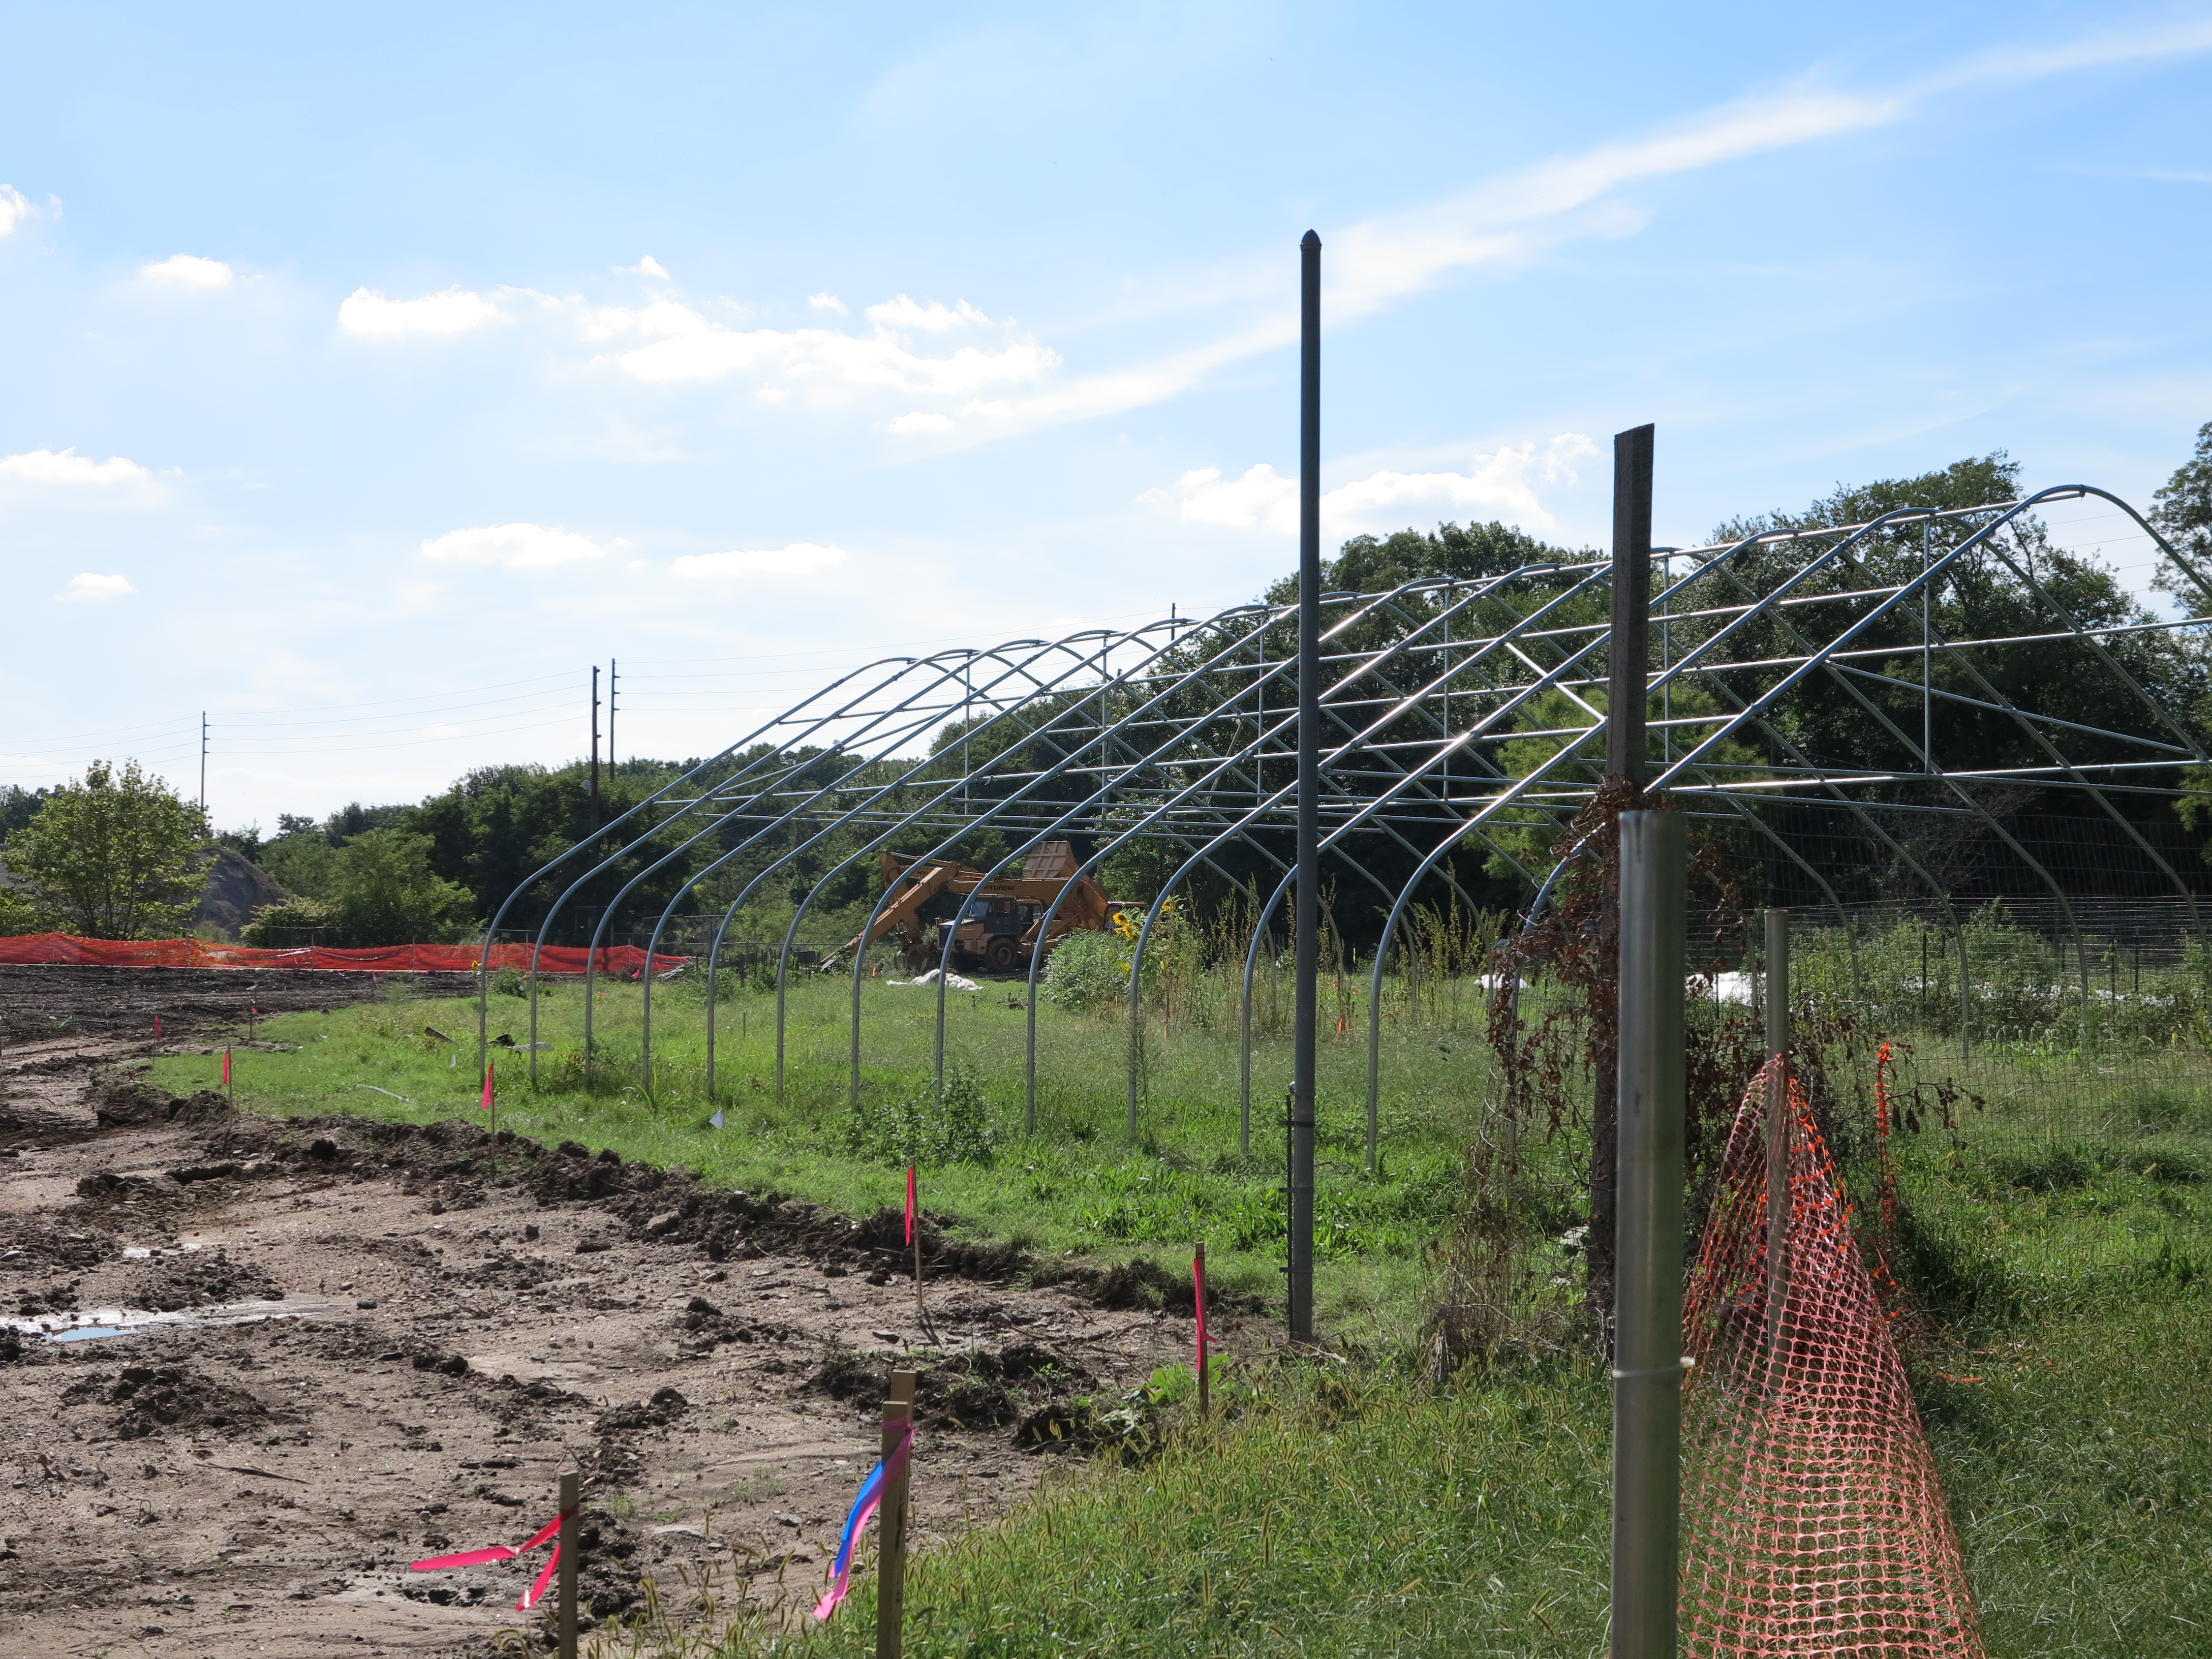 The outermost wetlands planting zone will contain trees and shrubs with edible parts to complement the adjacent community farm